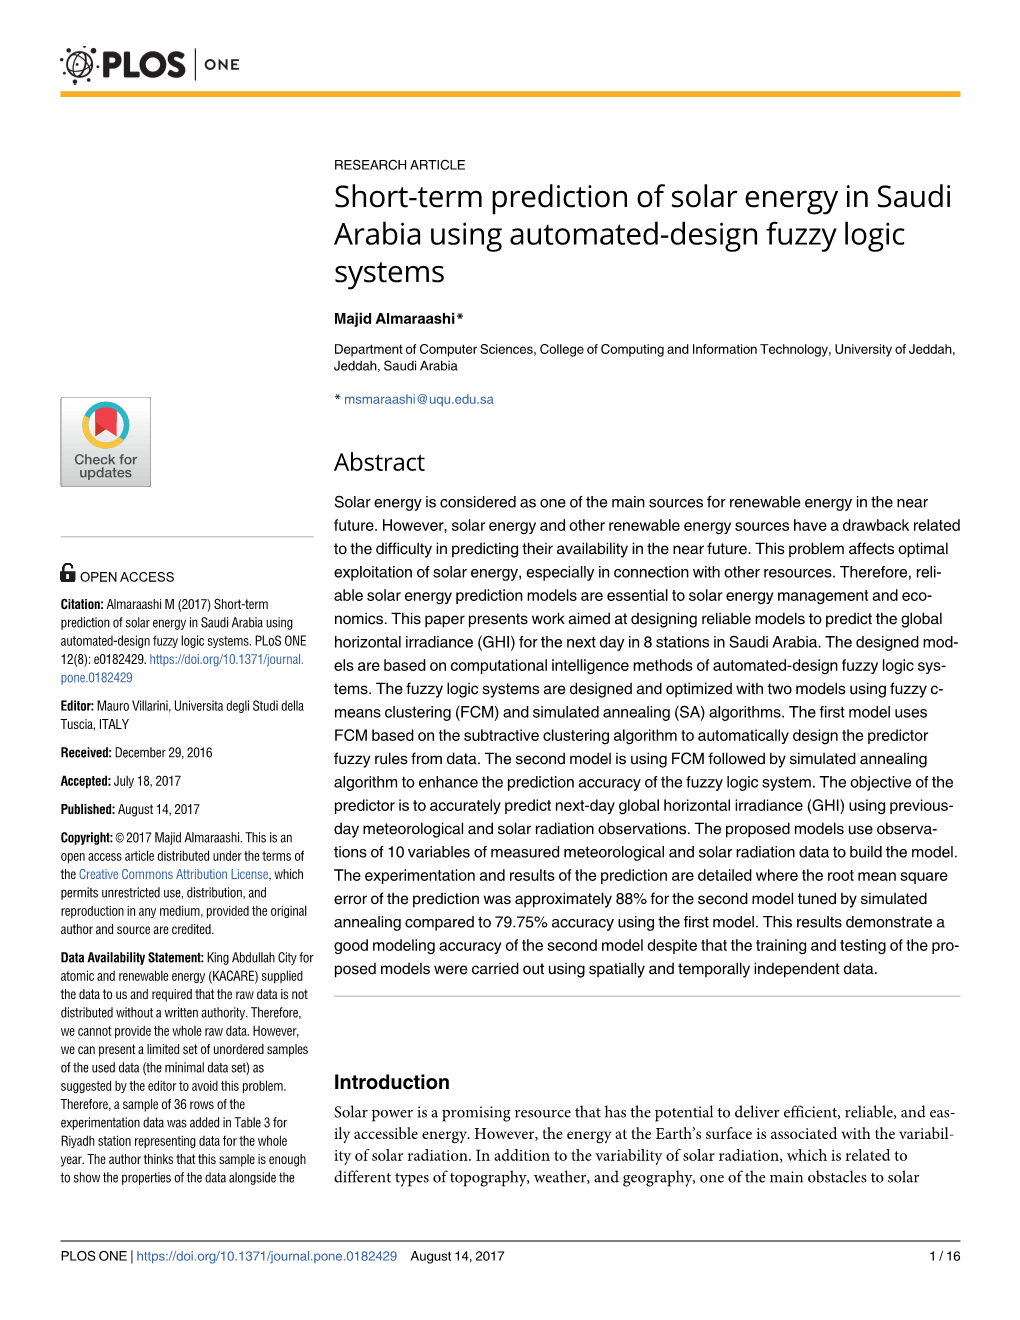 Short-Term Prediction of Solar Energy in Saudi Arabia Using Automated-Design Fuzzy Logic Systems